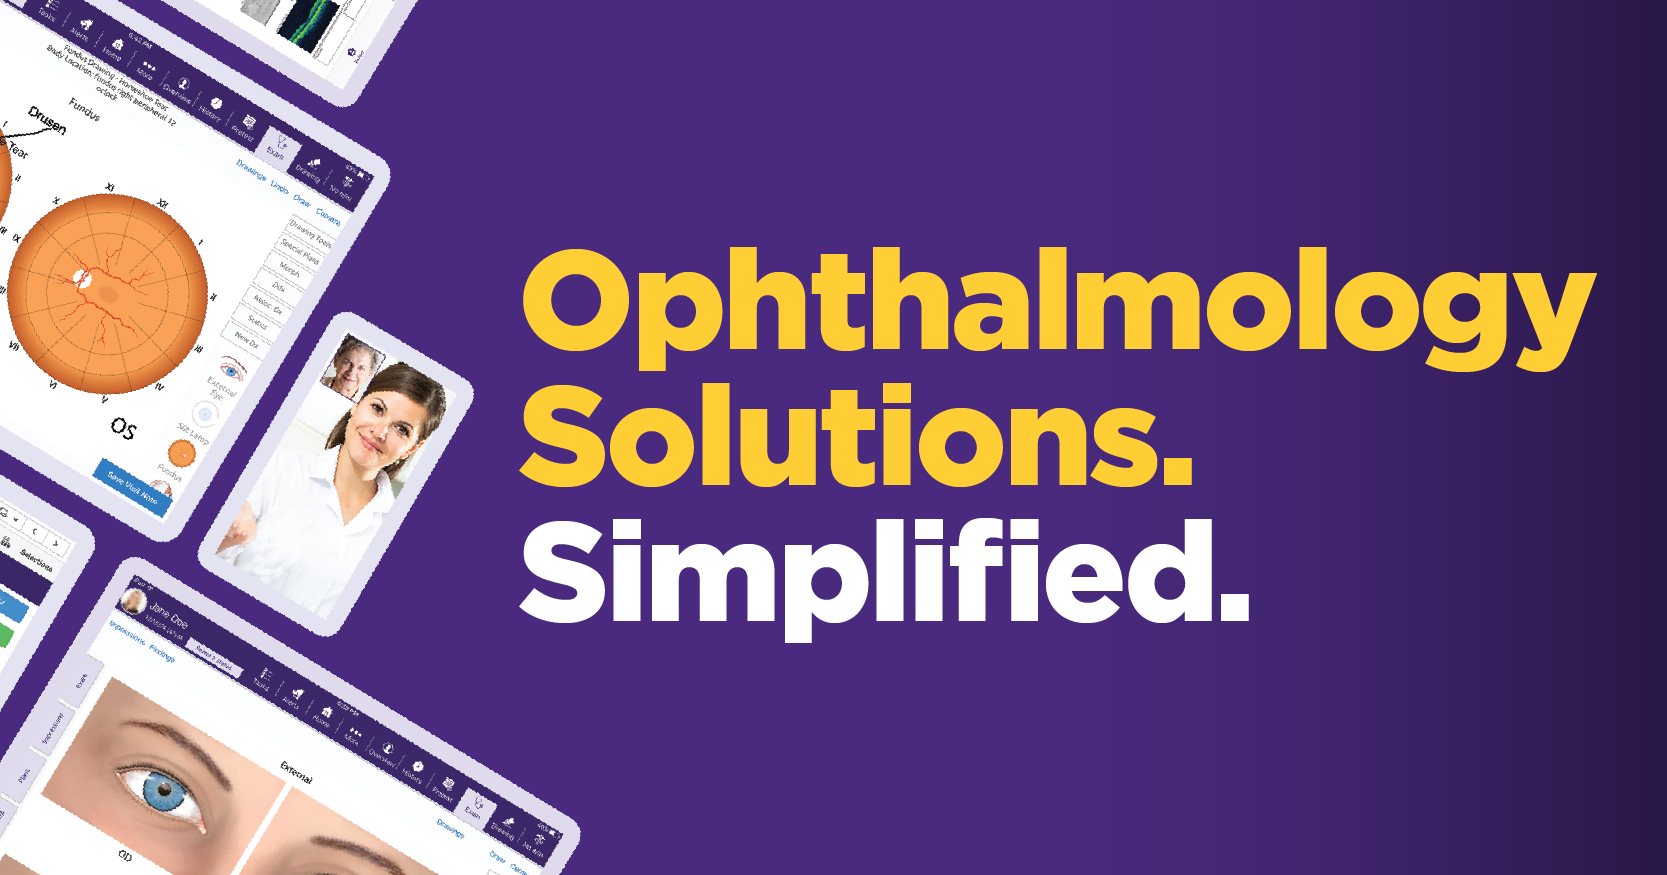 Ophthalmology solutions simplified